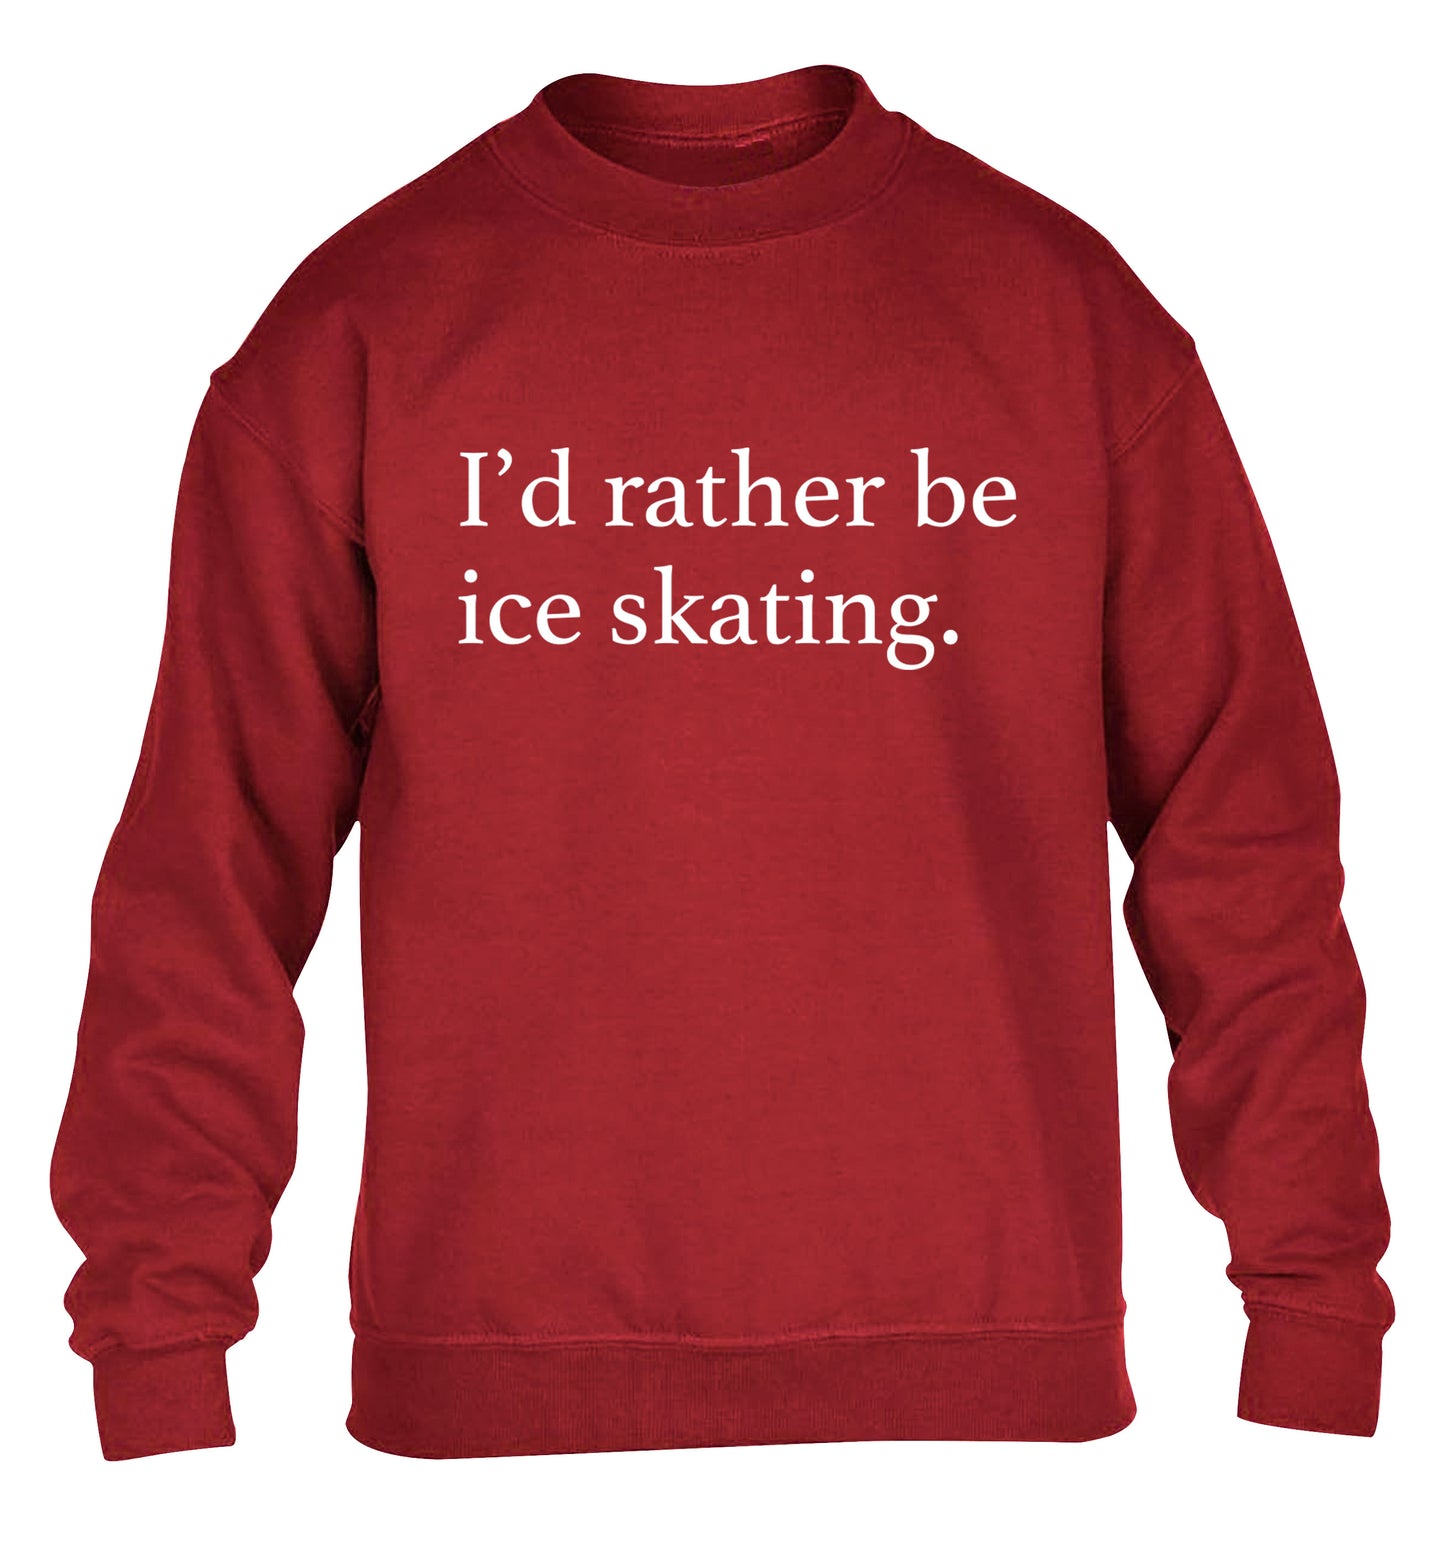 I'd rather be ice skating children's grey sweater 12-14 Years